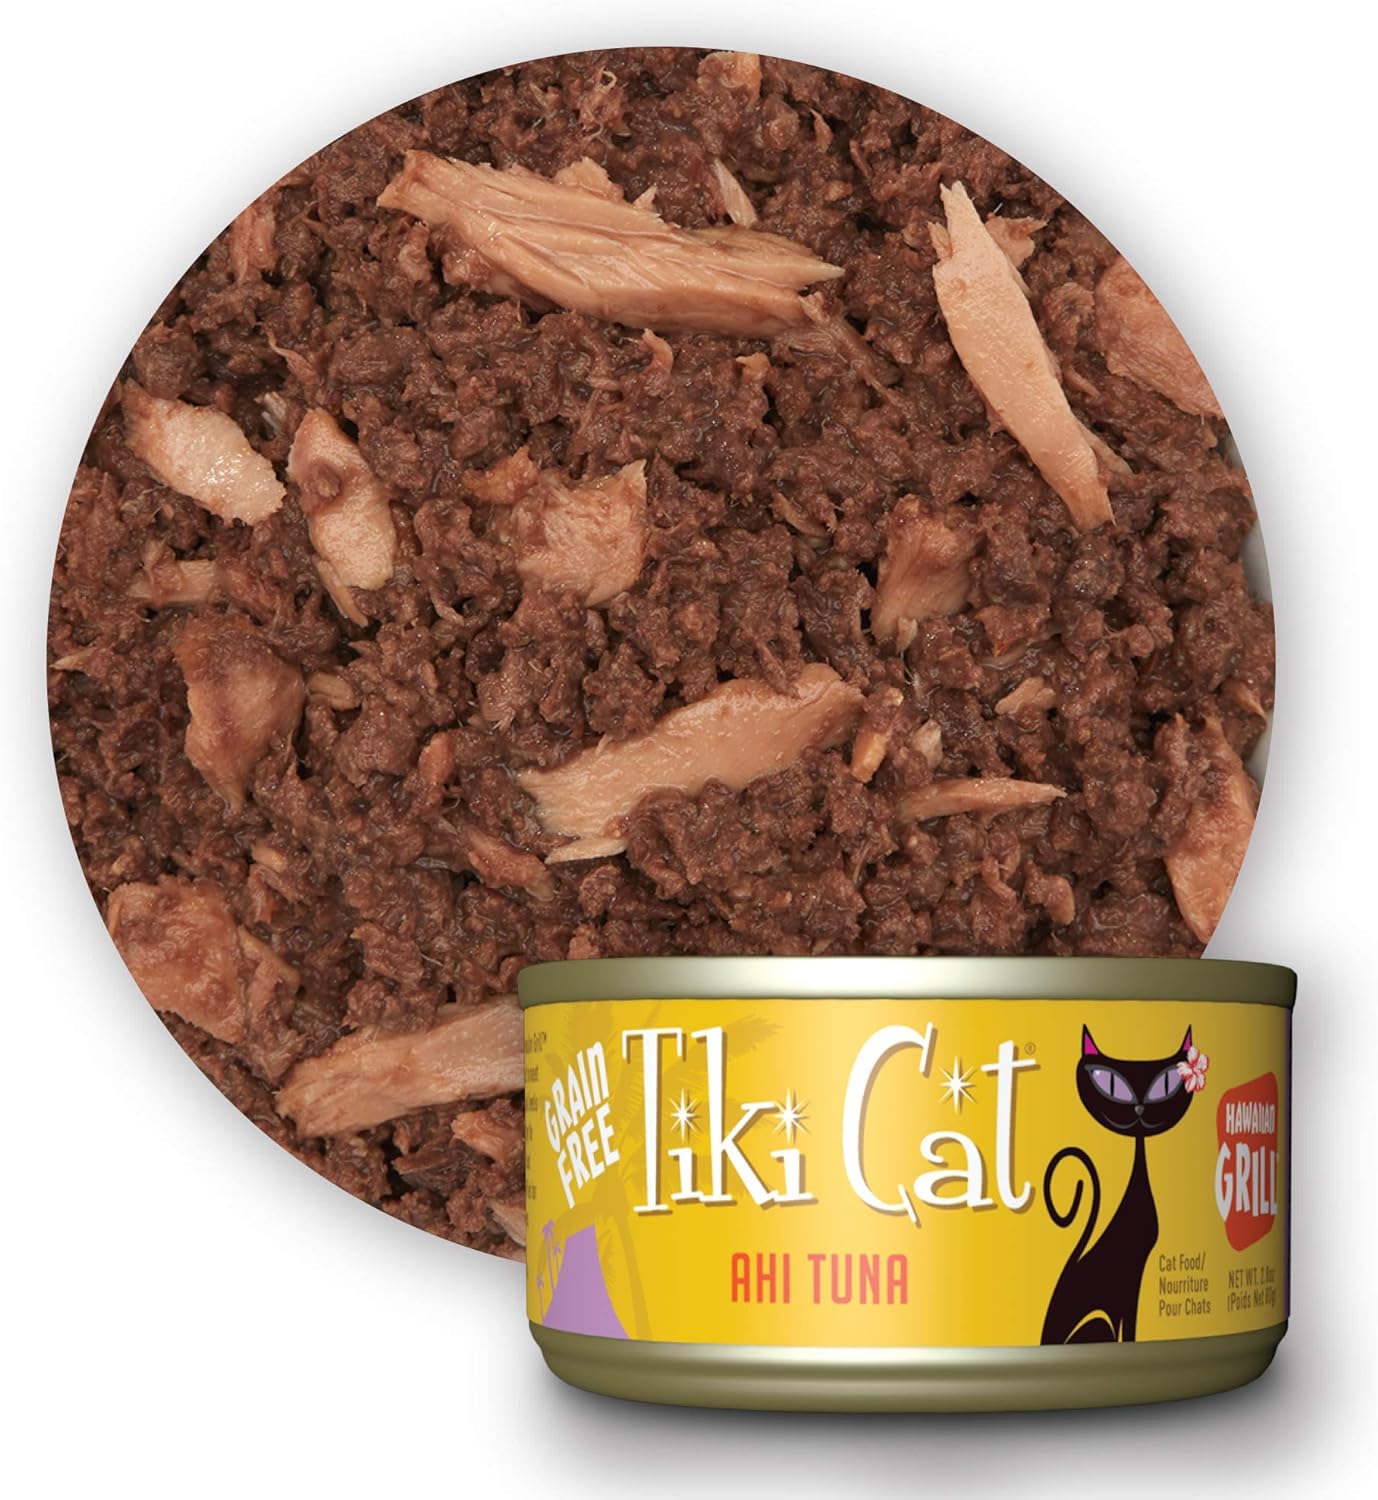 Tiki Cat Grill, Tuna & Crab Surimi, High-Protein and 100% Non-GMO Ingredients, Wet Whole Foods Cat Food for All Life Stages, 2.8 oz. Cans (Pack of 12)